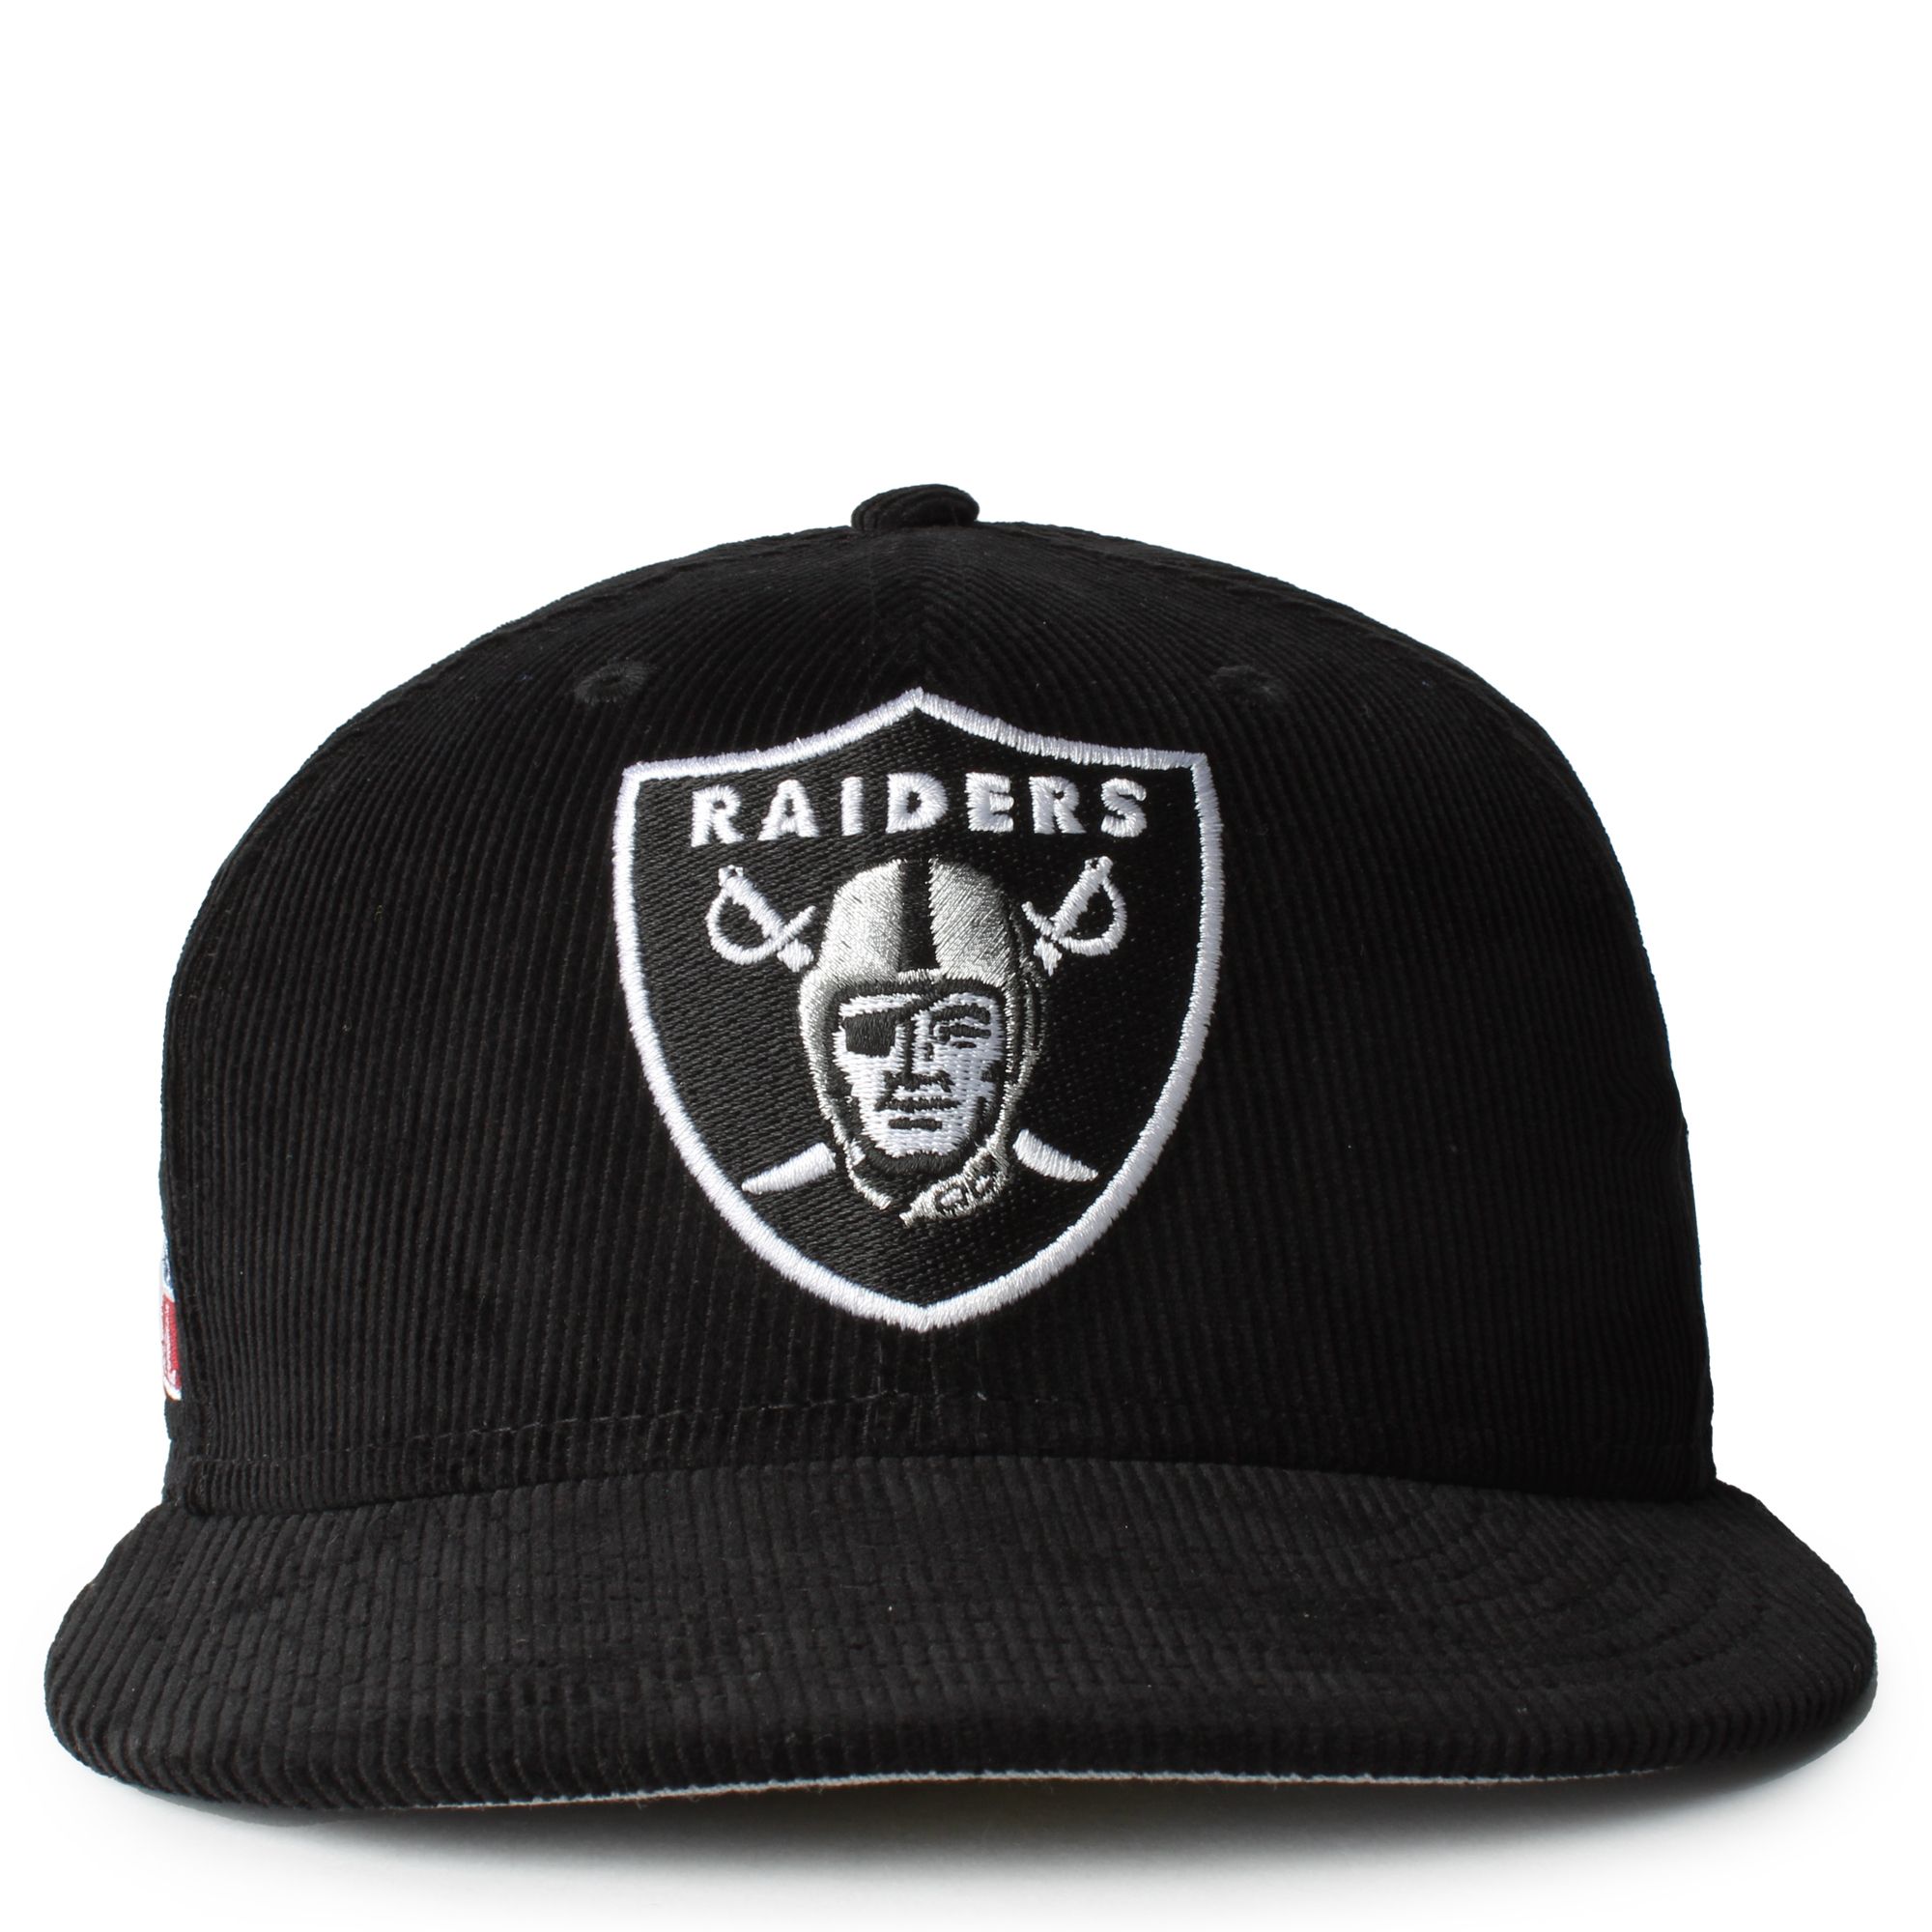 Las Vegas Raiders New Era Fitted 59FIFTY Hat Size 8 